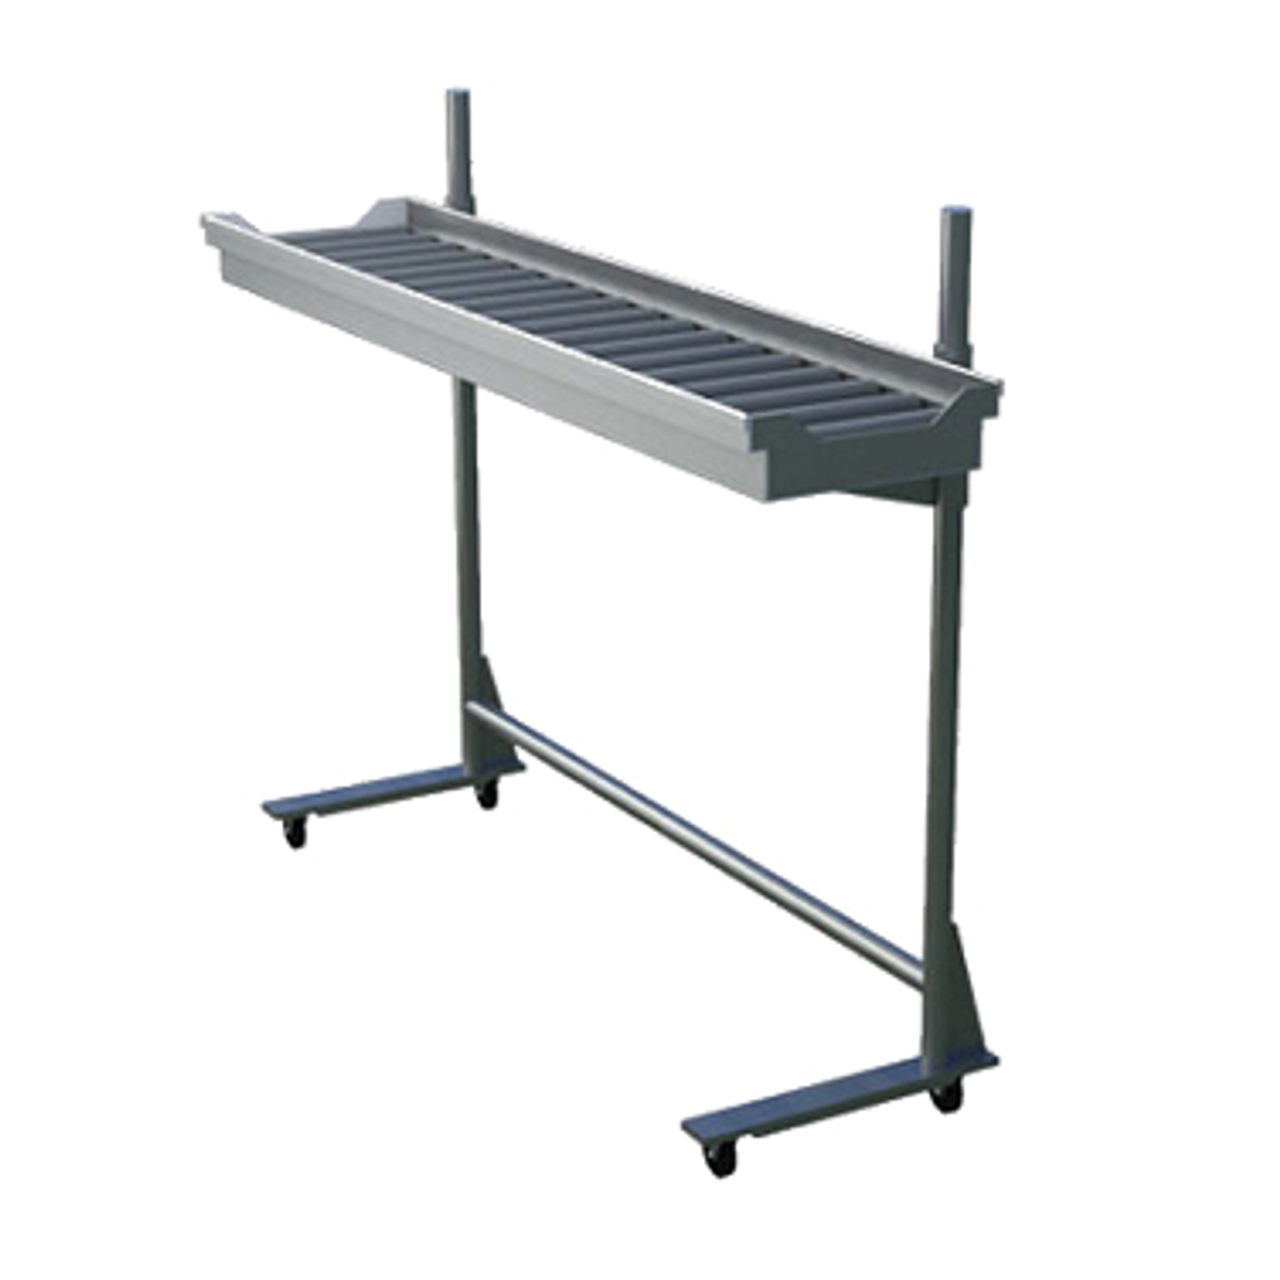 Tray Make-Up Conveyor, cantilever, PVC roller assemblies, 6' section, mobile, adjustable height, stainless steel uprights & frame, (6) 3" casters, (3) with brakes